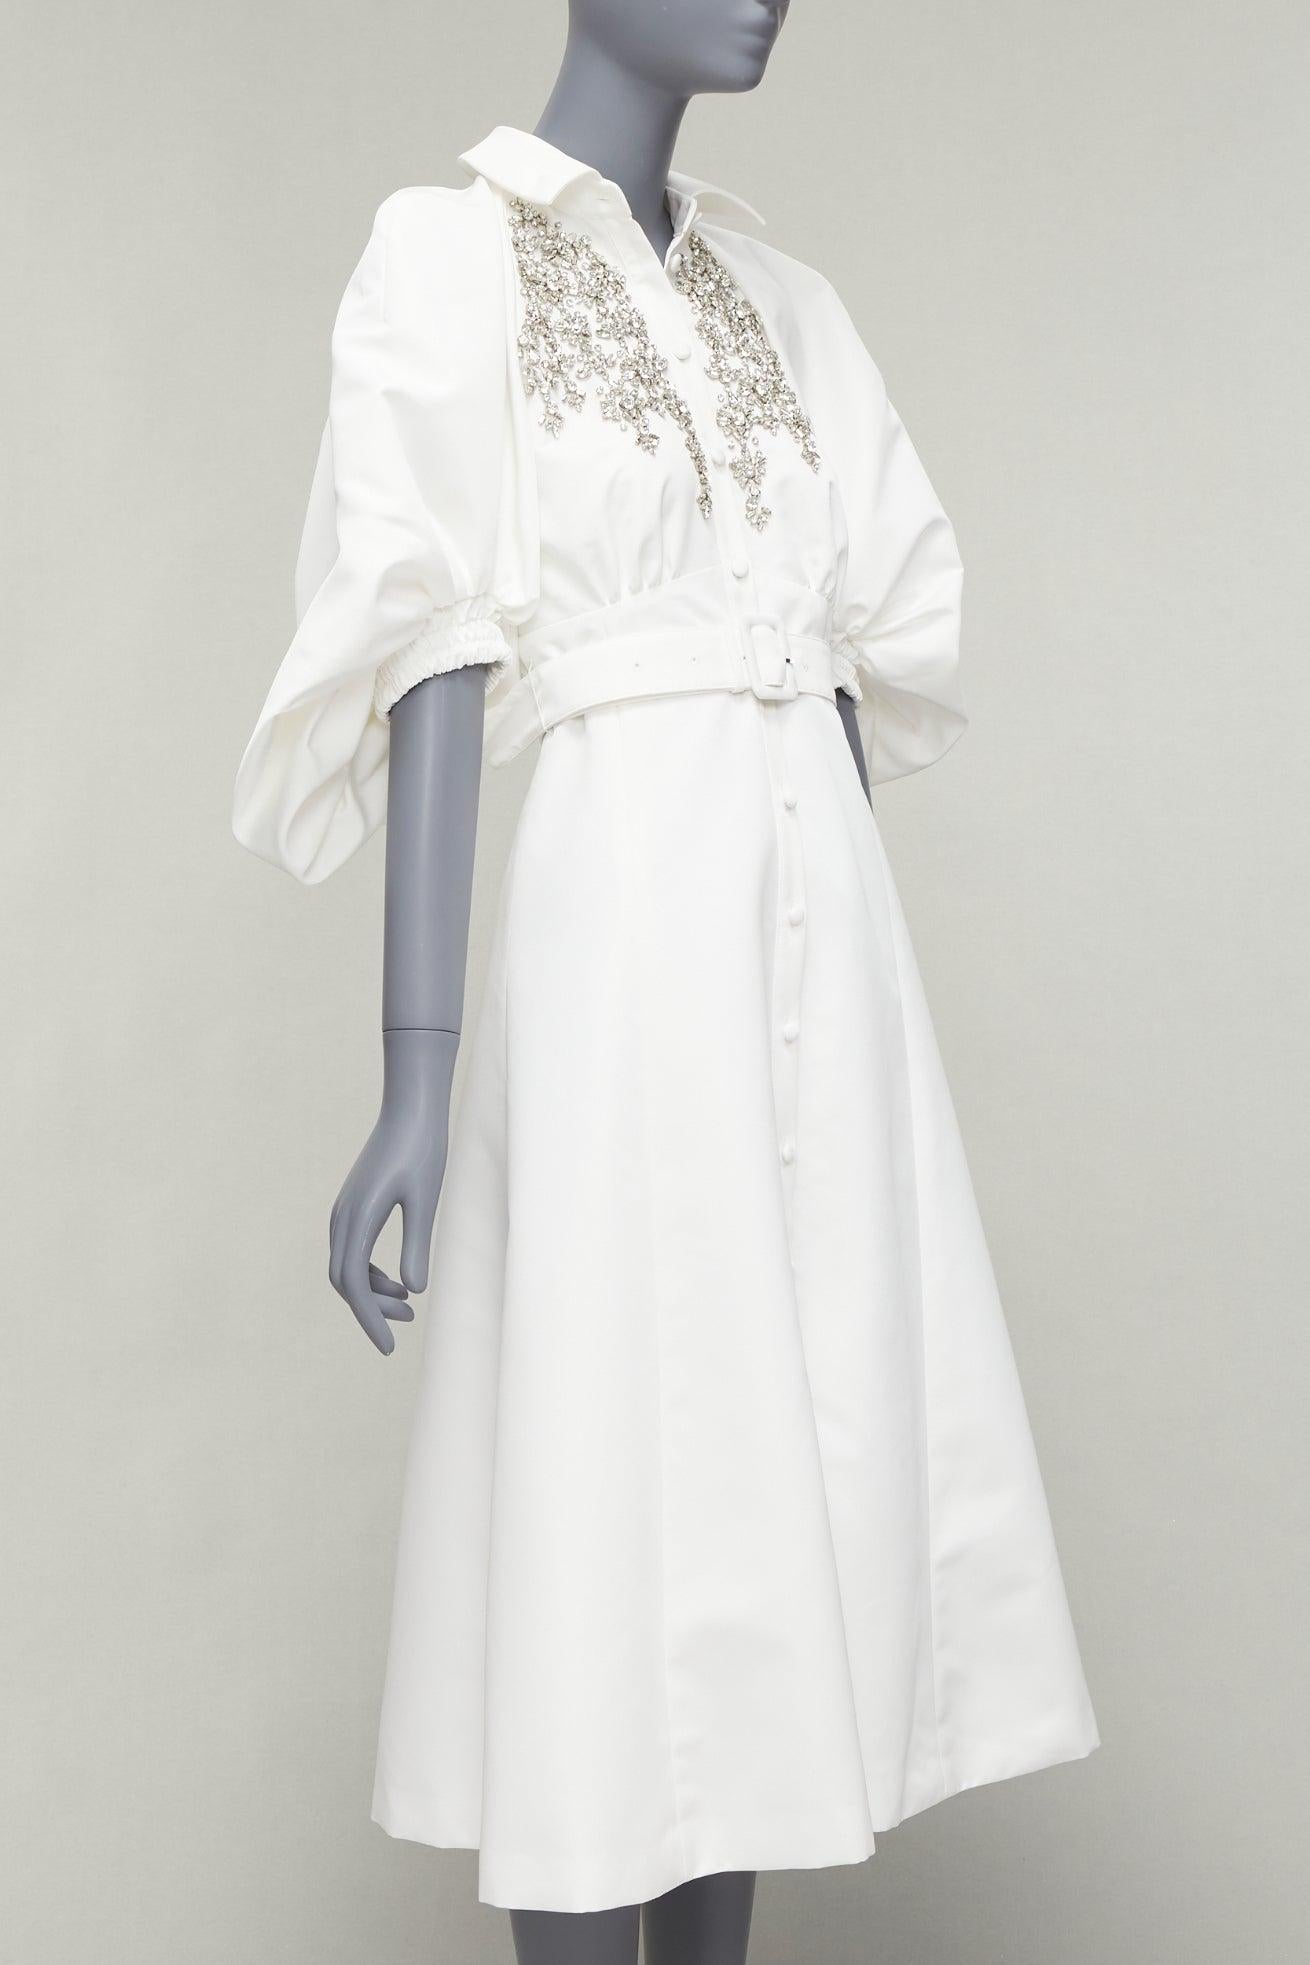 HUISHAN ZHANG 2022 Mercer white crystal embellished silk lined midi dress US6 M
Reference: AAWC/A00562
Brand: Huishan Zhang
Model: Mercer
Collection: 2022 Pre Fall
Material: Polyester
Color: White, Silver
Pattern: Solid
Closure: Button
Lining: White